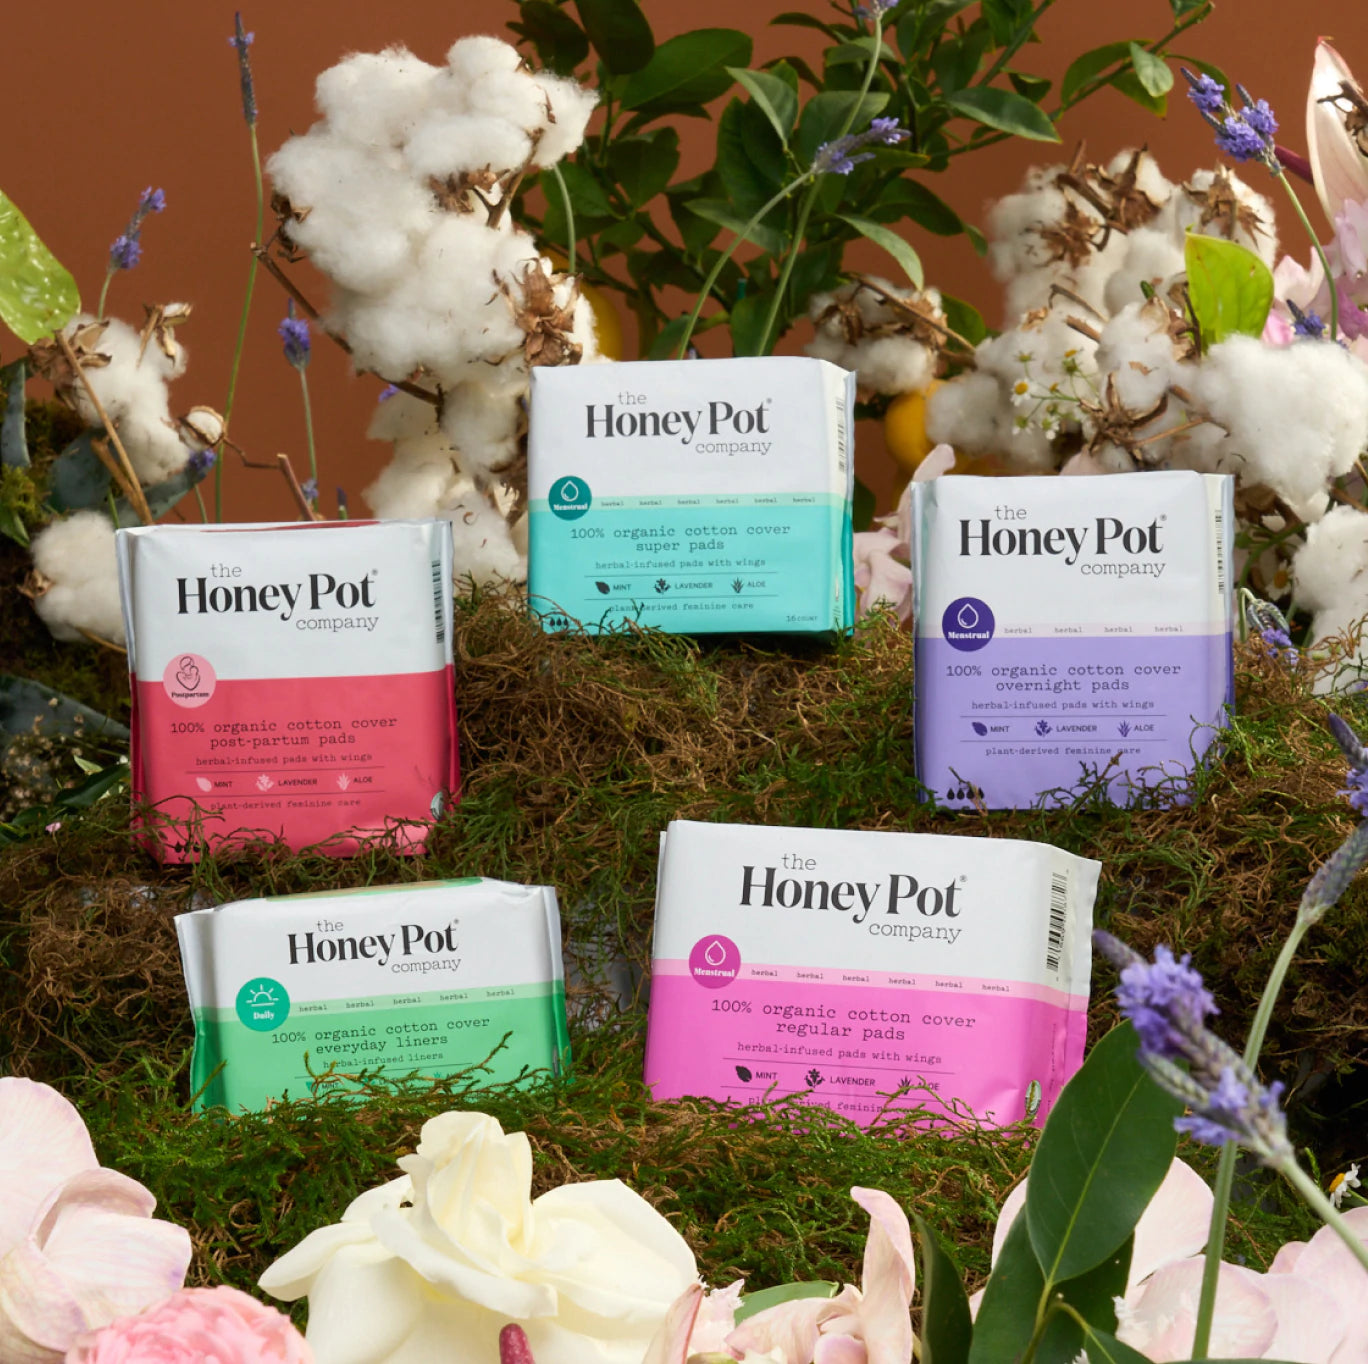 The Honey Pot - Pads Post-partum Herbal - 1 Each 1-12 CT